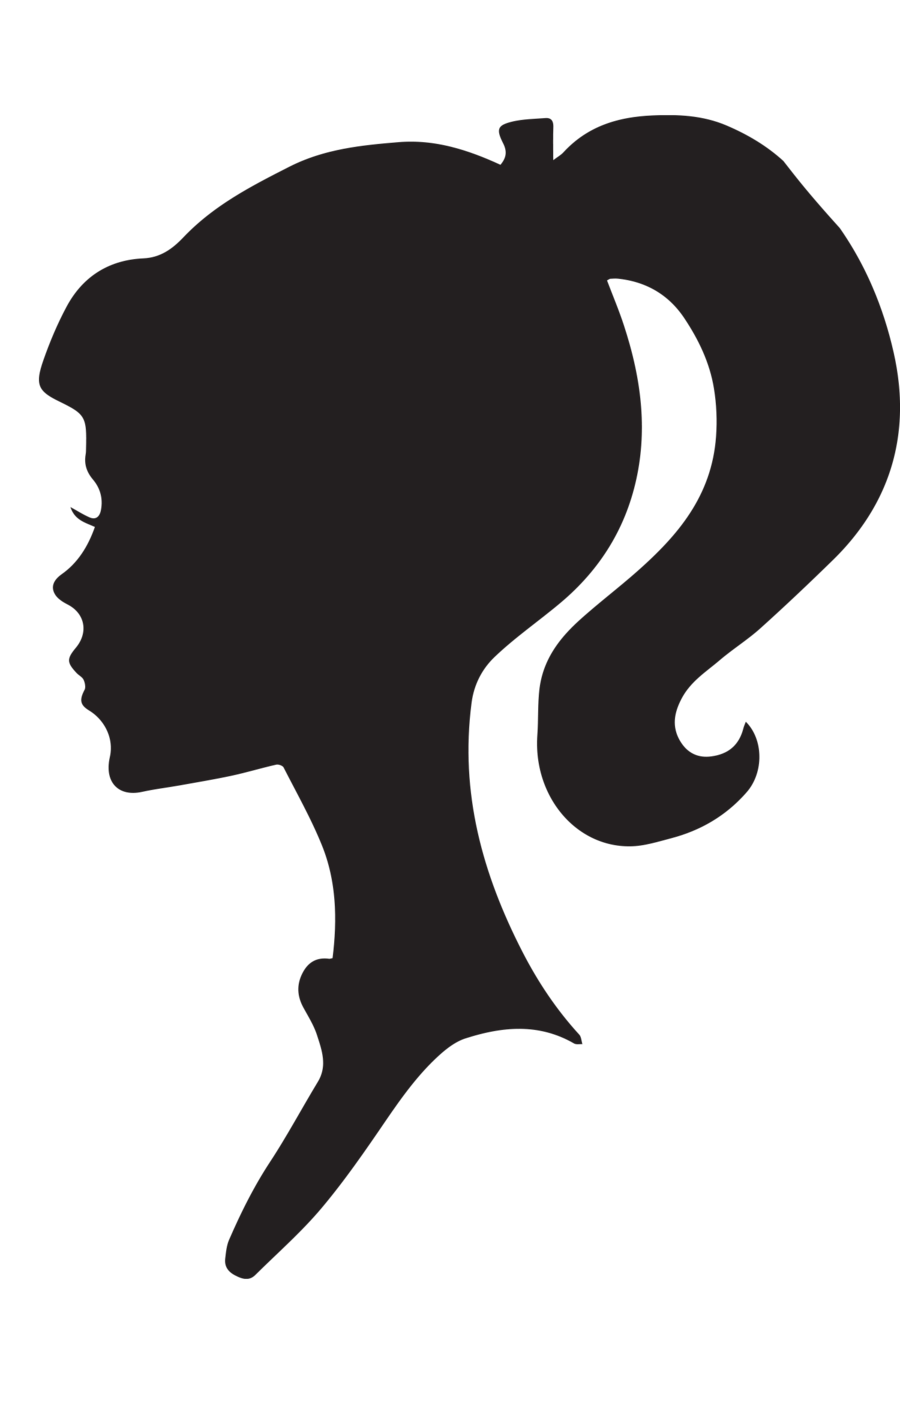 Female side silhouette at. Evidence clipart woman